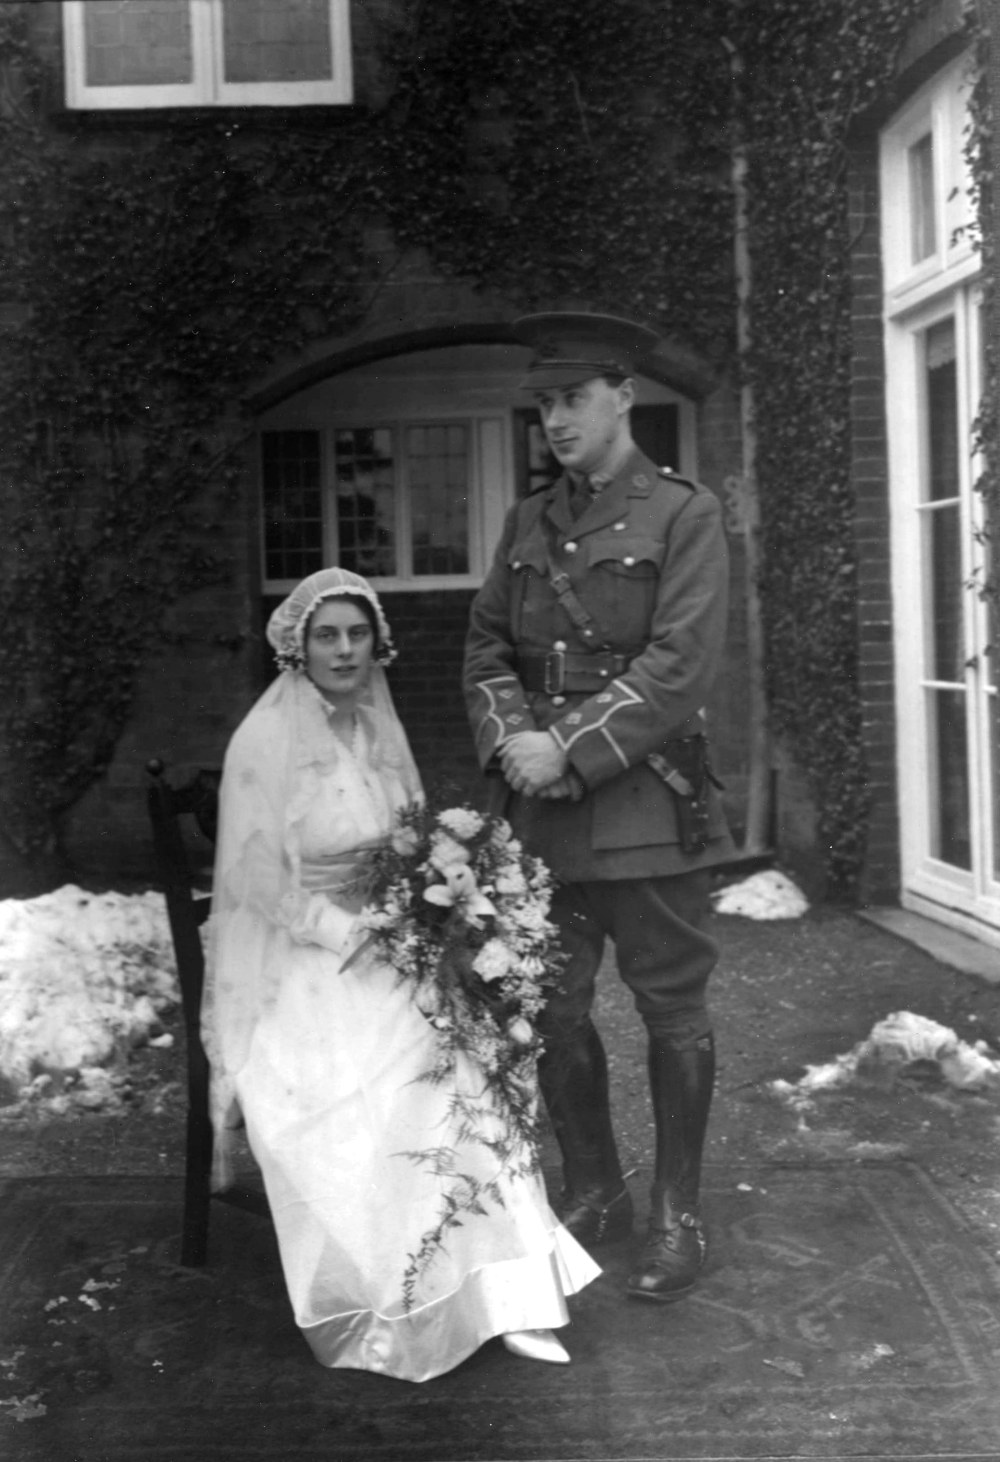 Alexander Wilson in First World War officer's uniform on his wedding day with Gladys in 1916. Image: (c) Alexander Wilson Estate. All rights reserved.